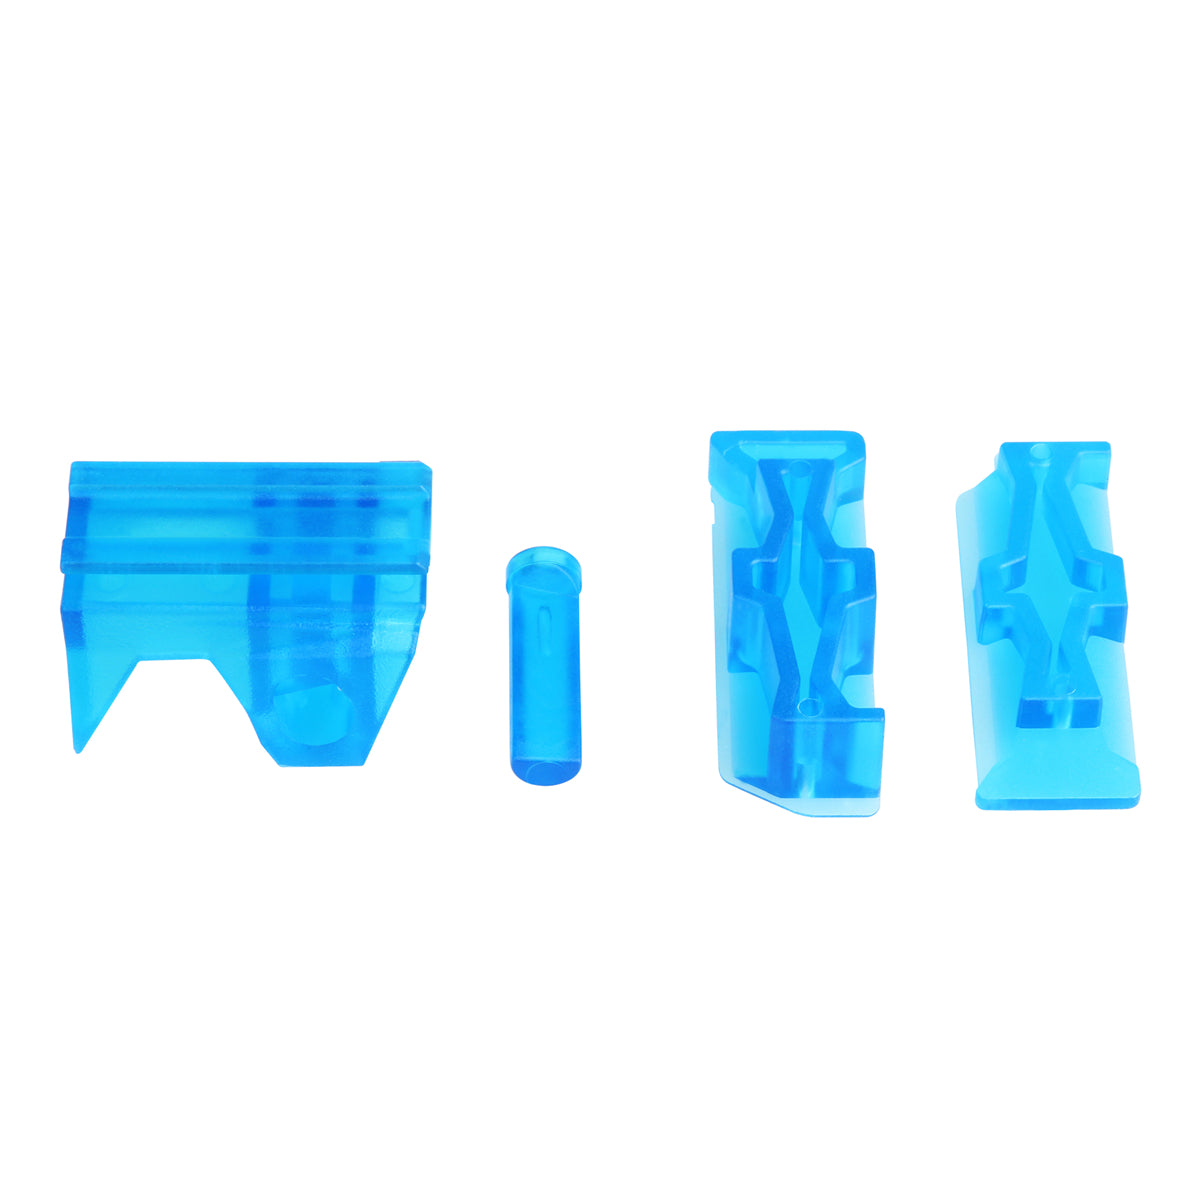 Worker Mod Top and Side Rail Adapter Picatinny Base Set for Nerf Stryfe and Worker Mod Swordfish Blaster Toy Color Blue Transparent - BlasterMOD